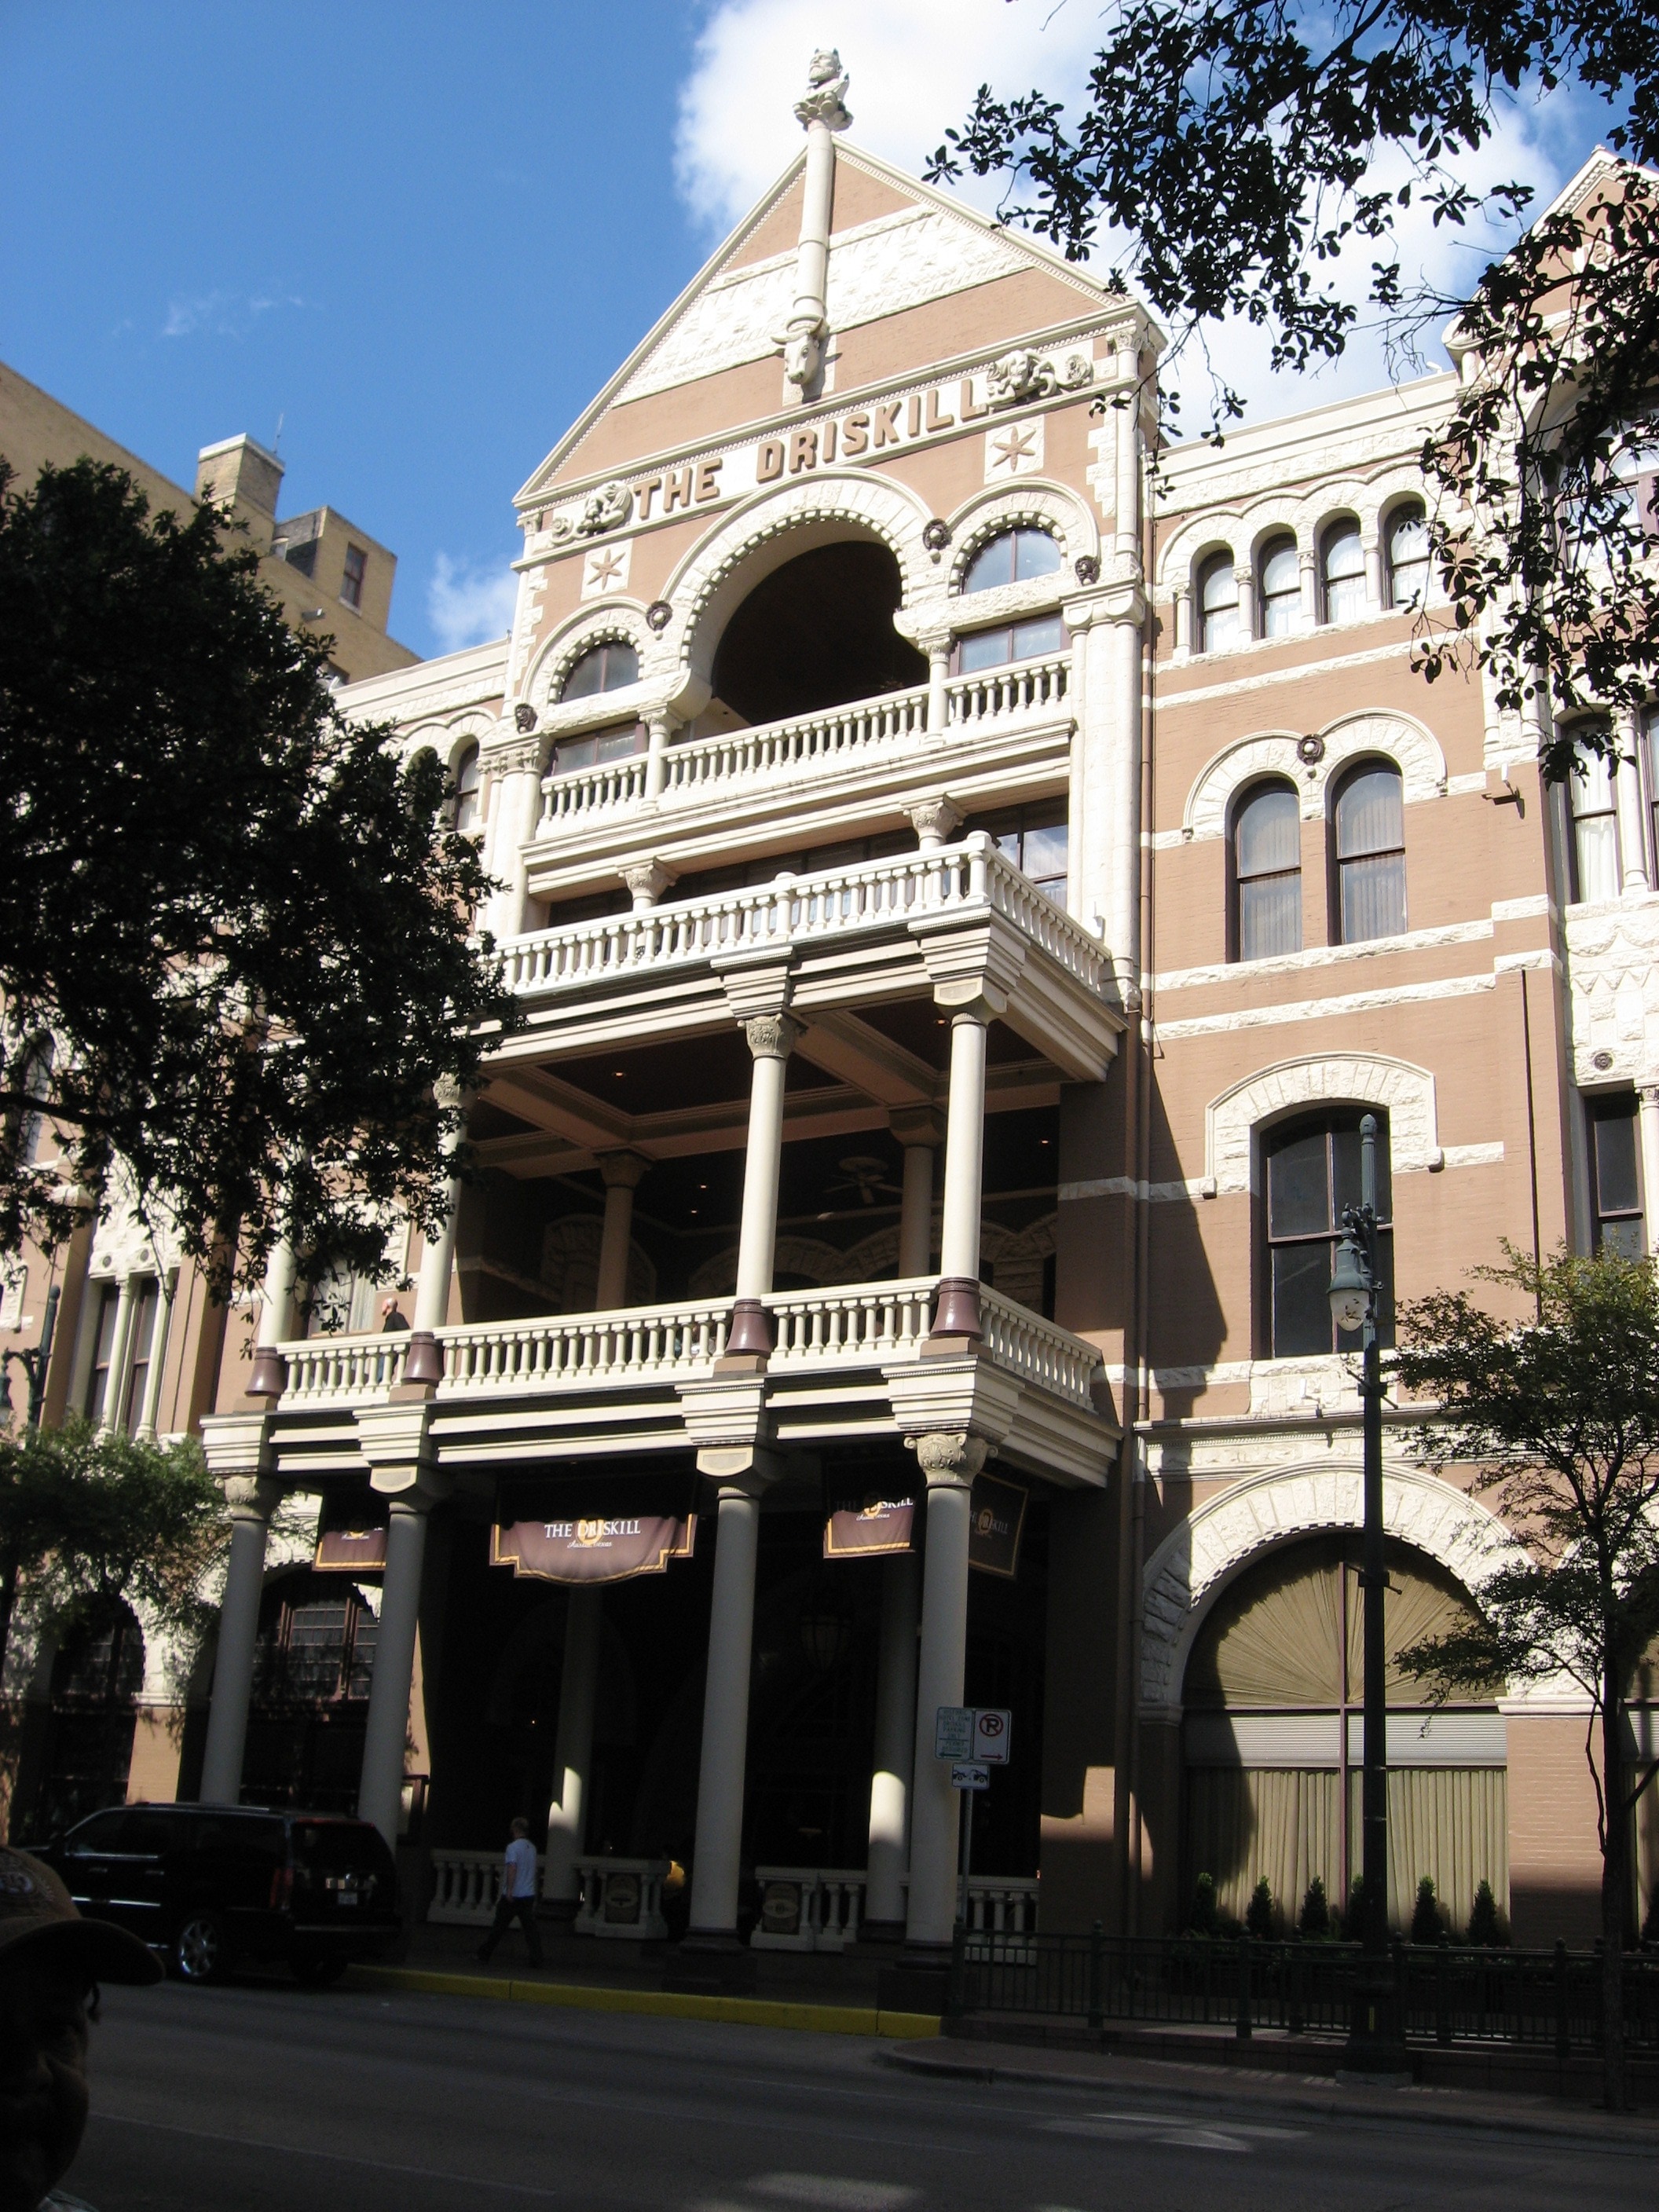 Hotel, Driskill, Austin, Downtown, Texas, architecture, low angle view